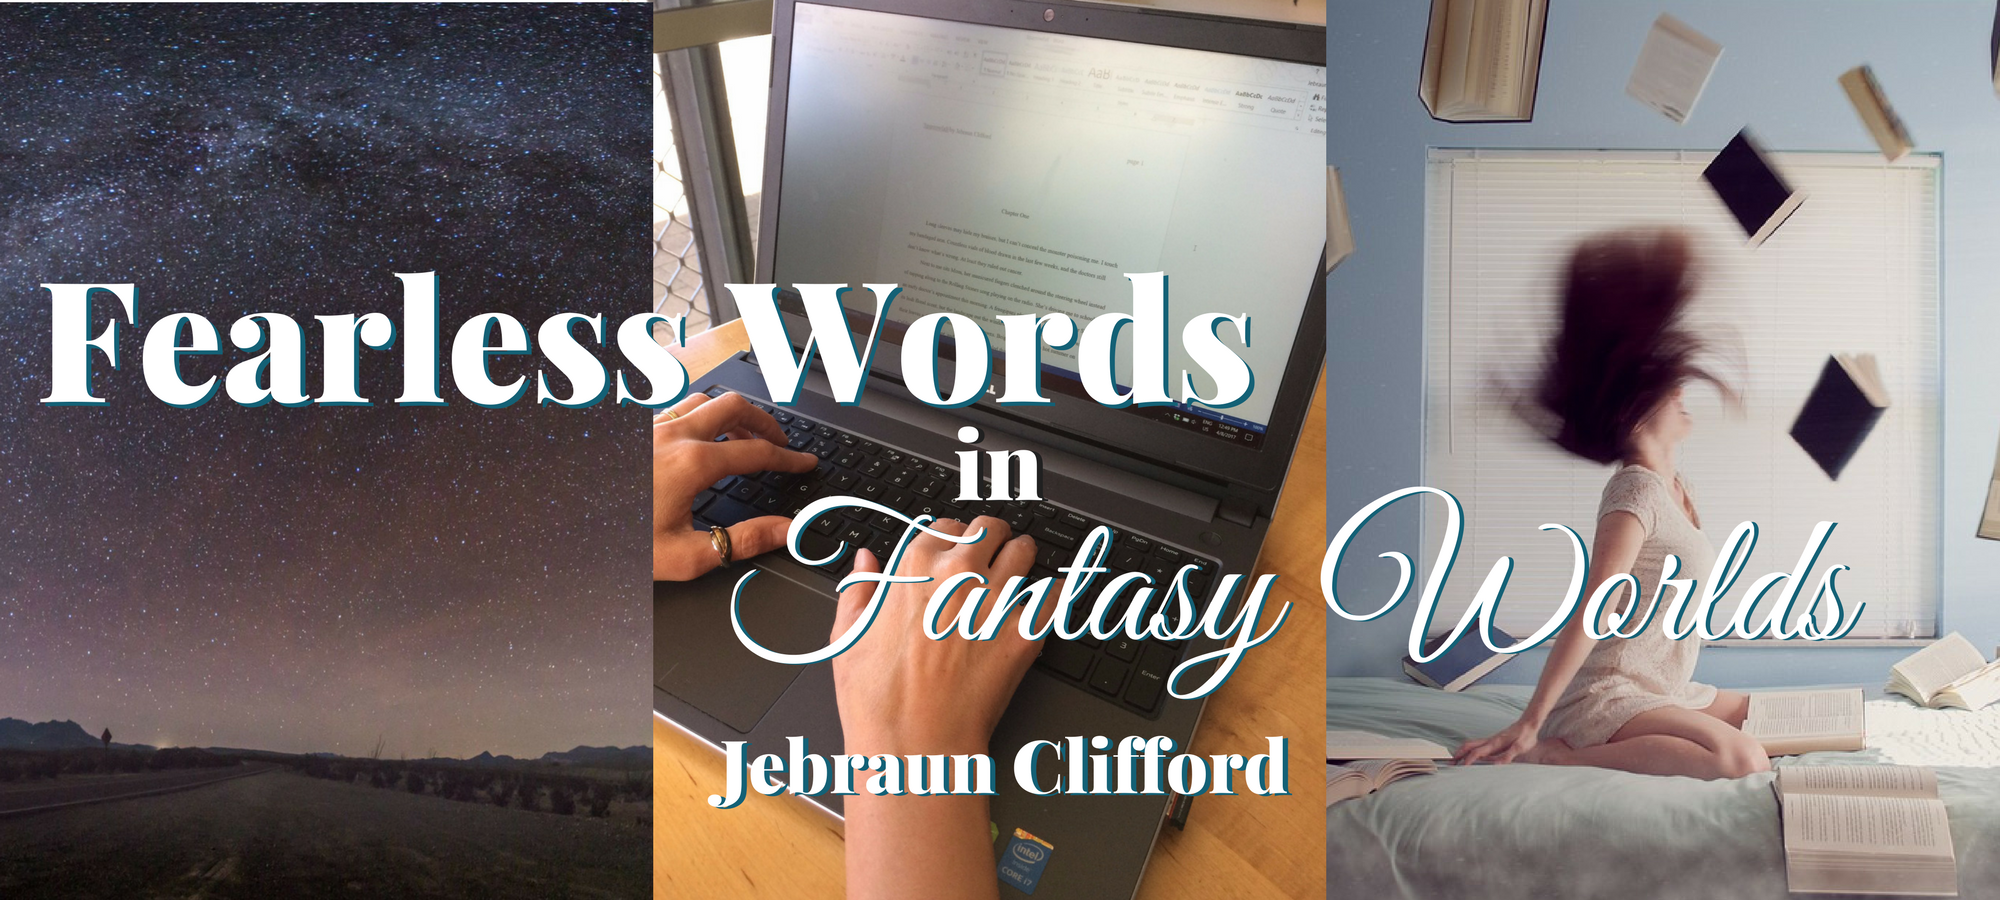 Fearless Words in Fantasy Worlds jebraunclifford.com